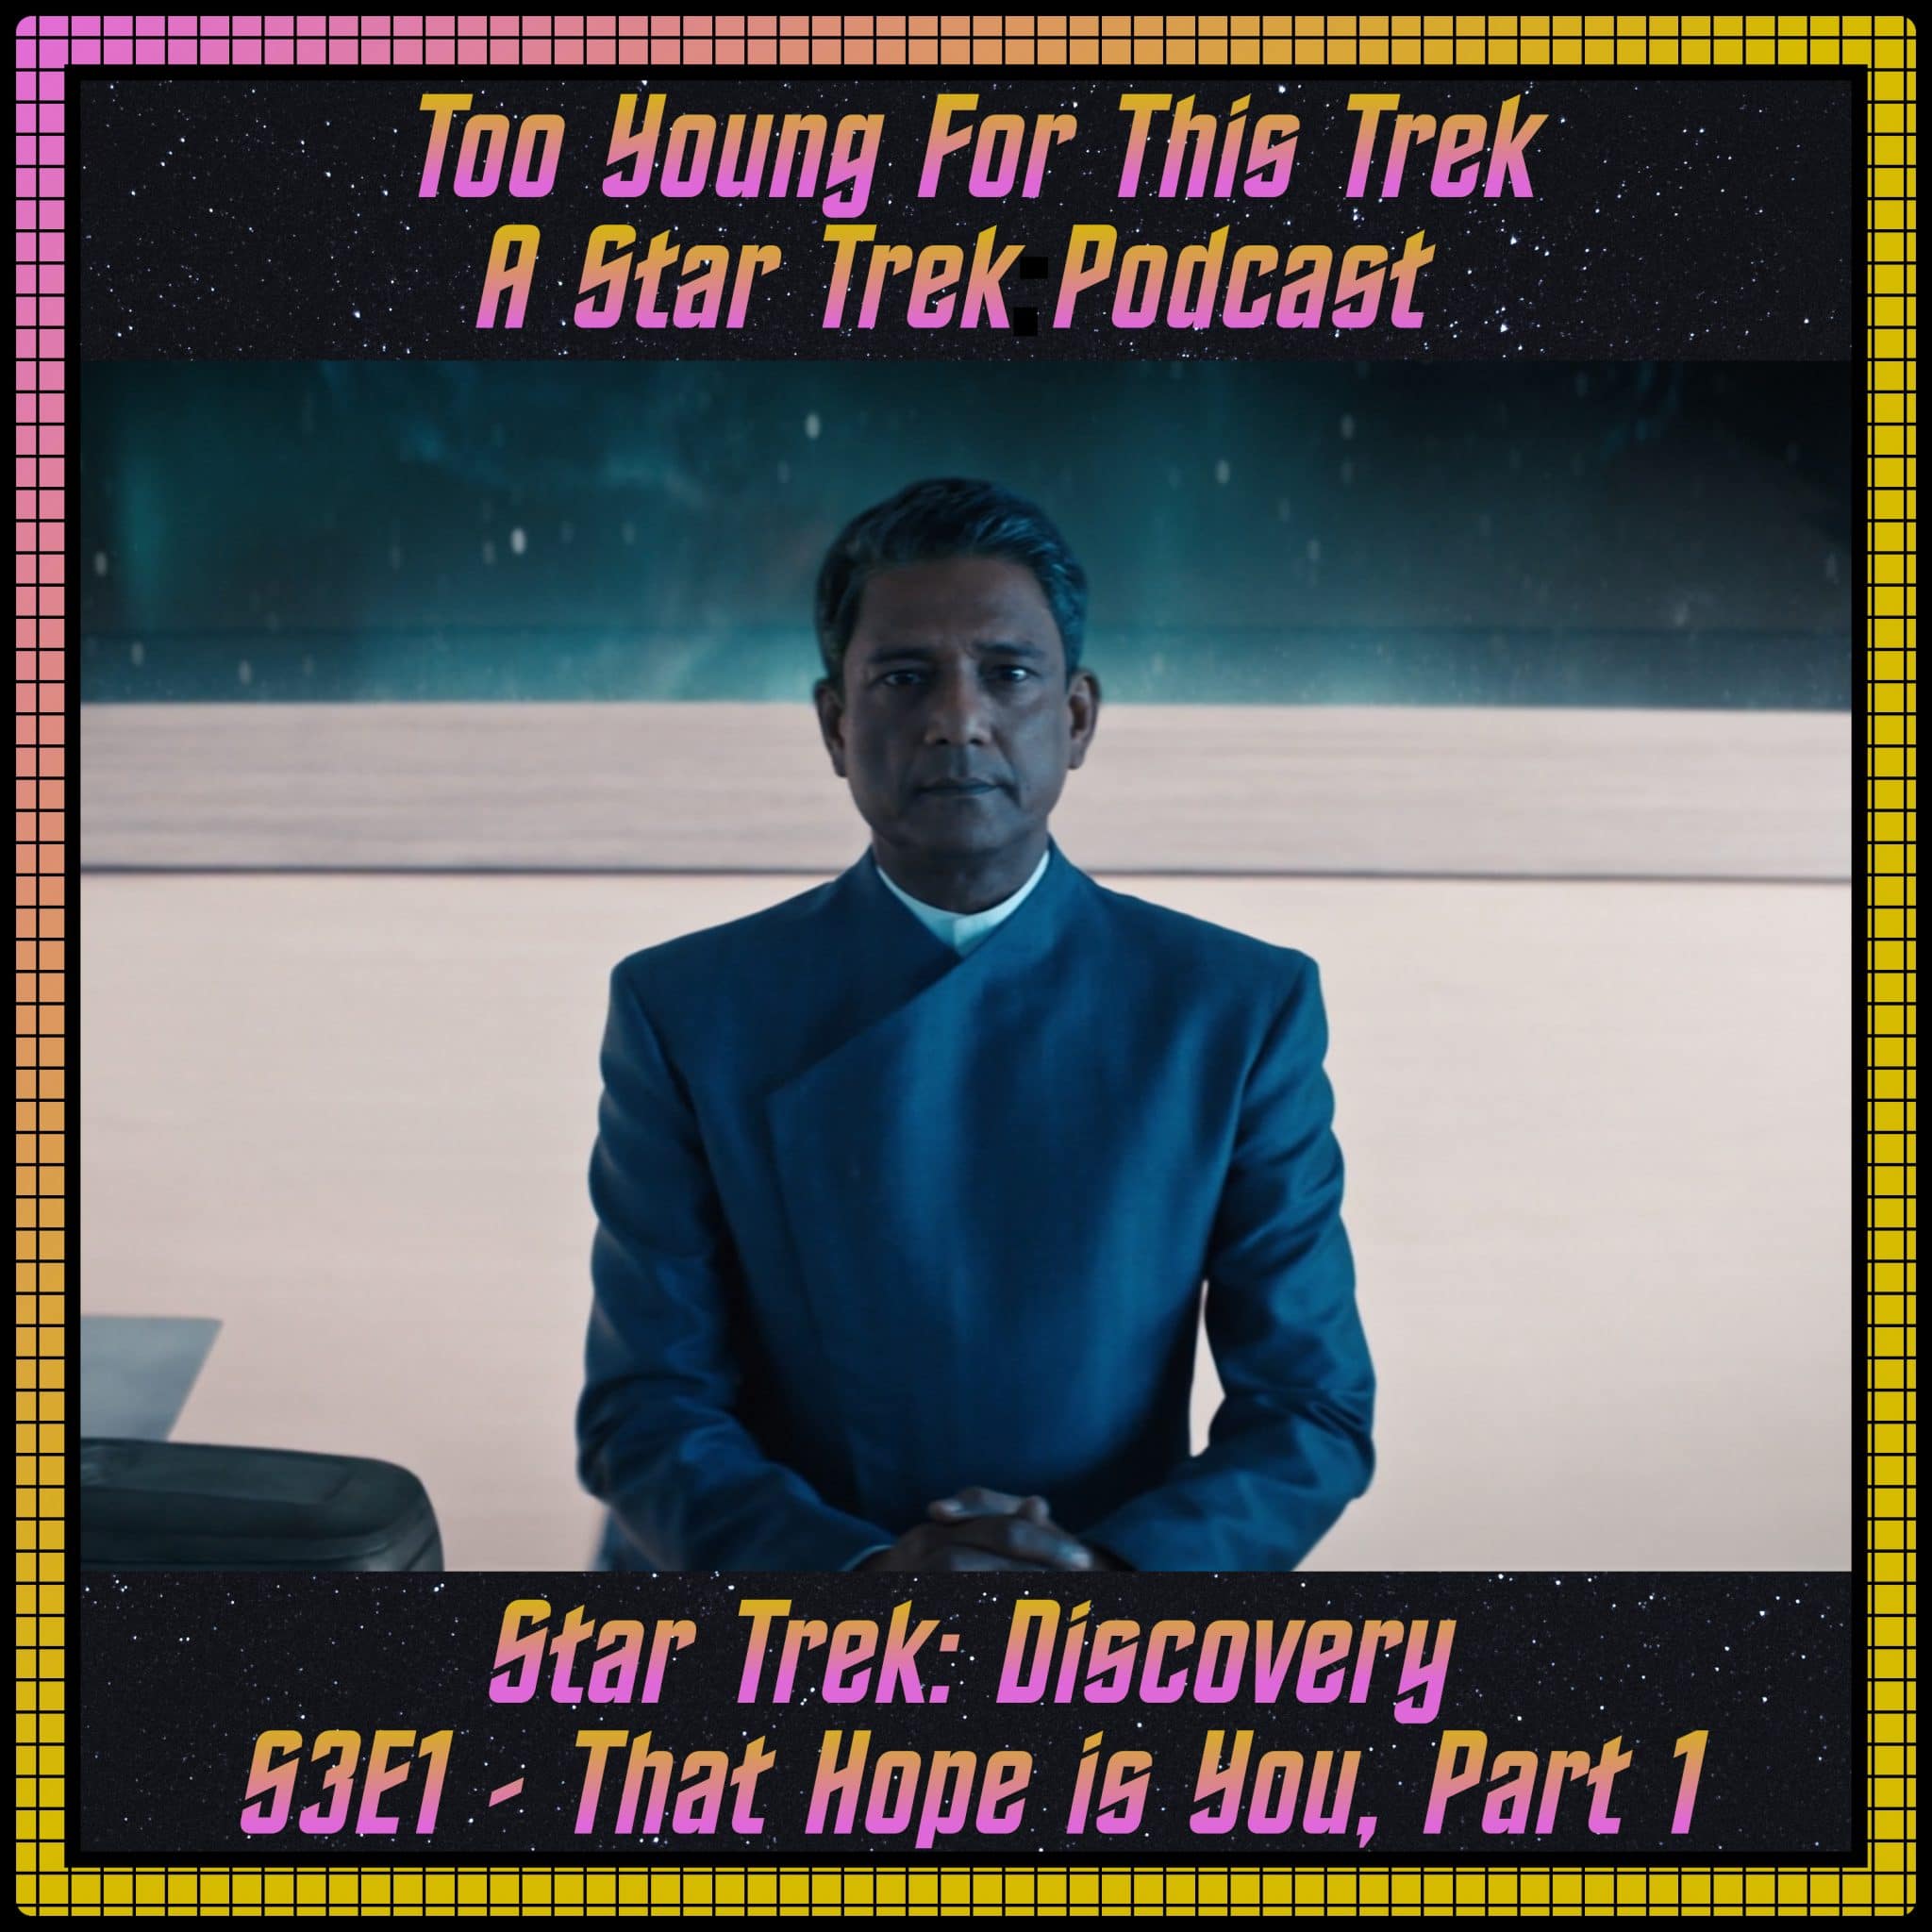 Star Trek: Discovery S3E1 - That Hope Is You, Part 1